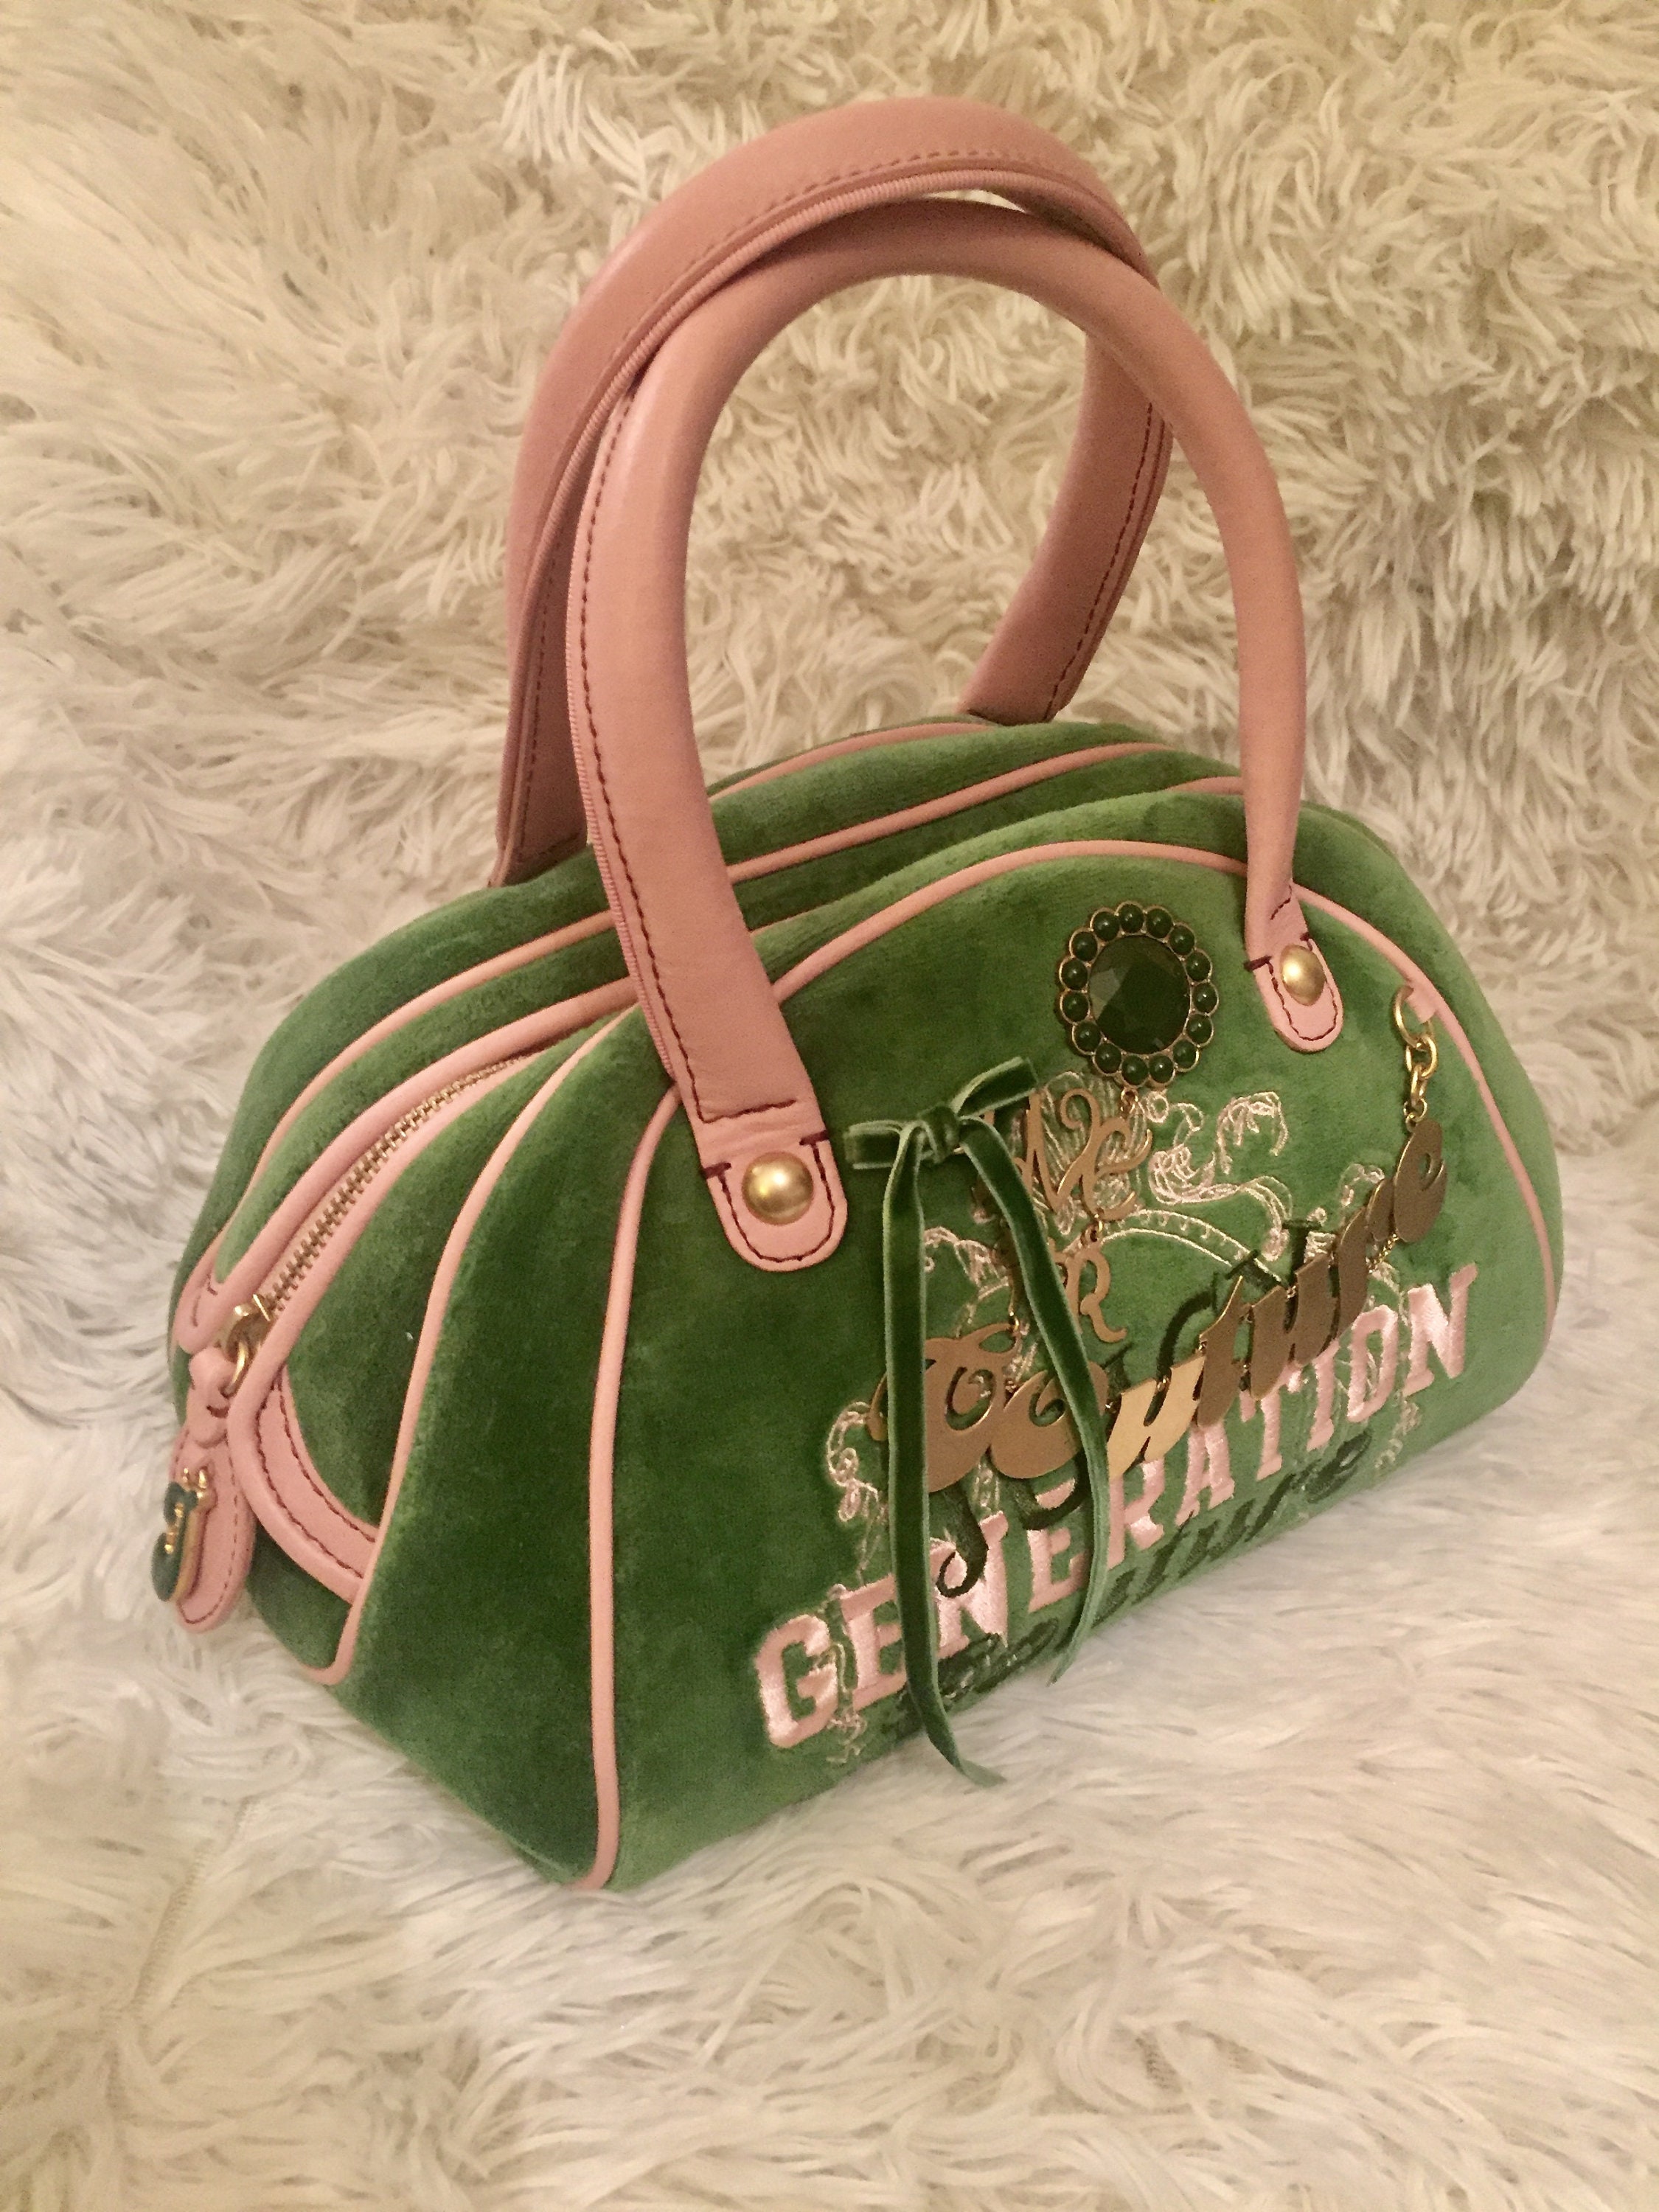 Update 78+ juicy couture 2000s bags latest - in.duhocakina